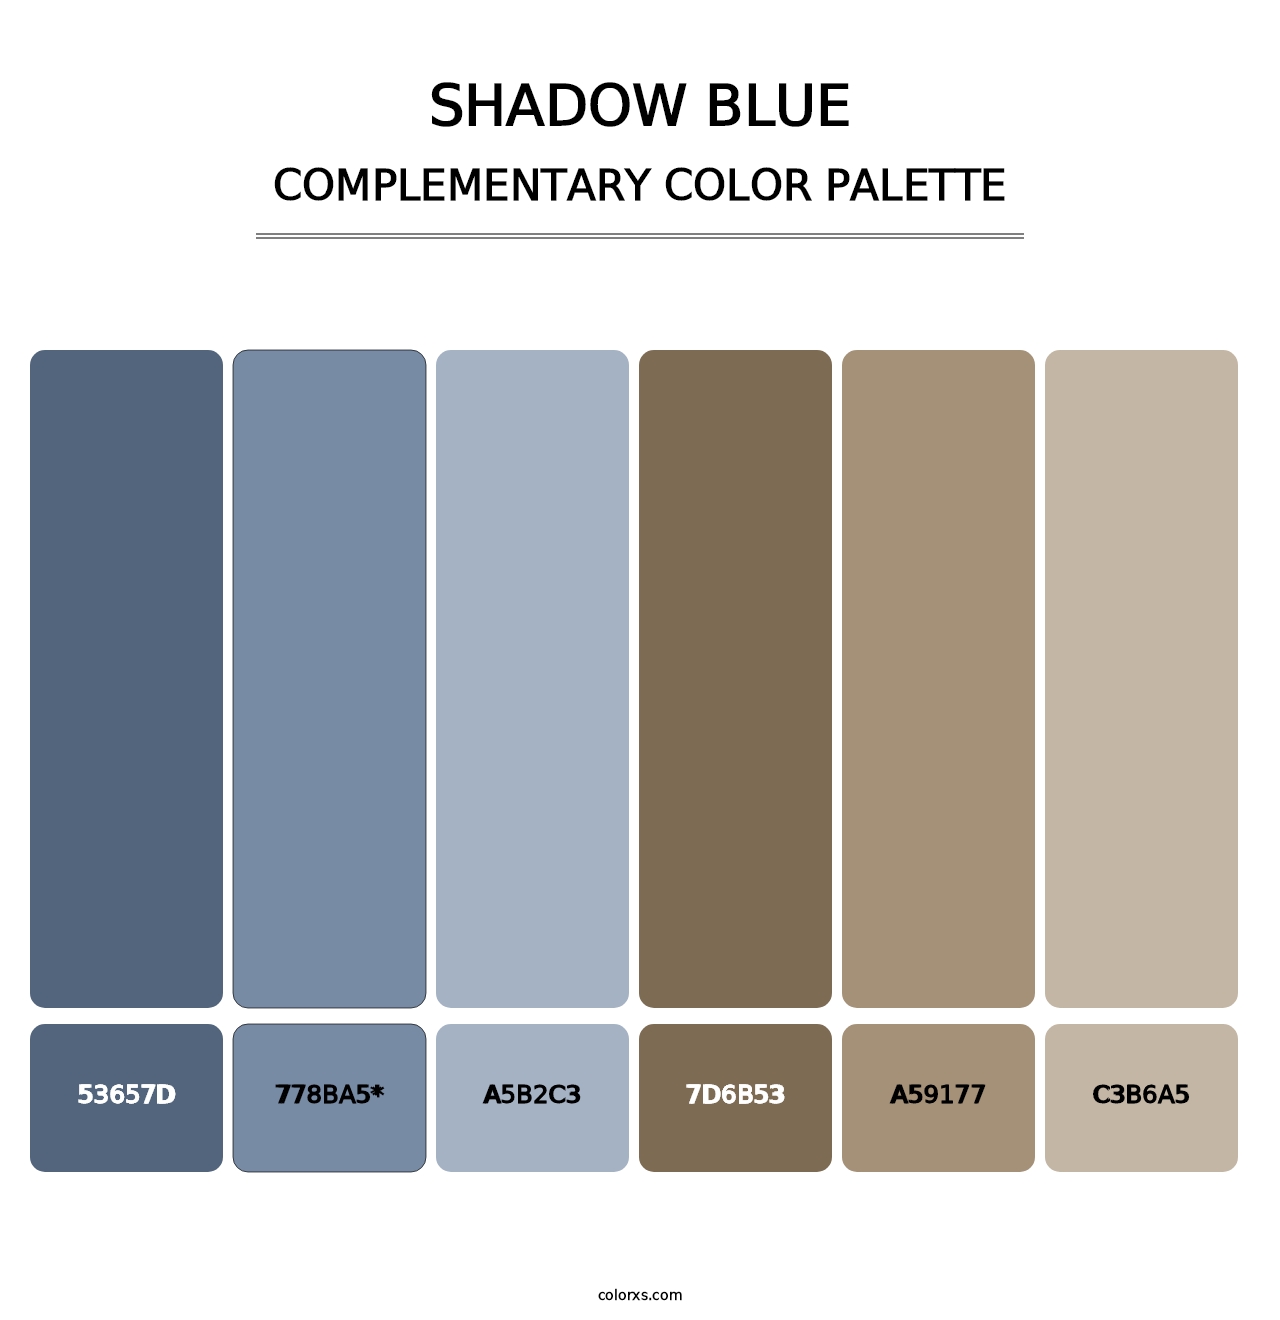 Shadow Blue - Complementary Color Palette